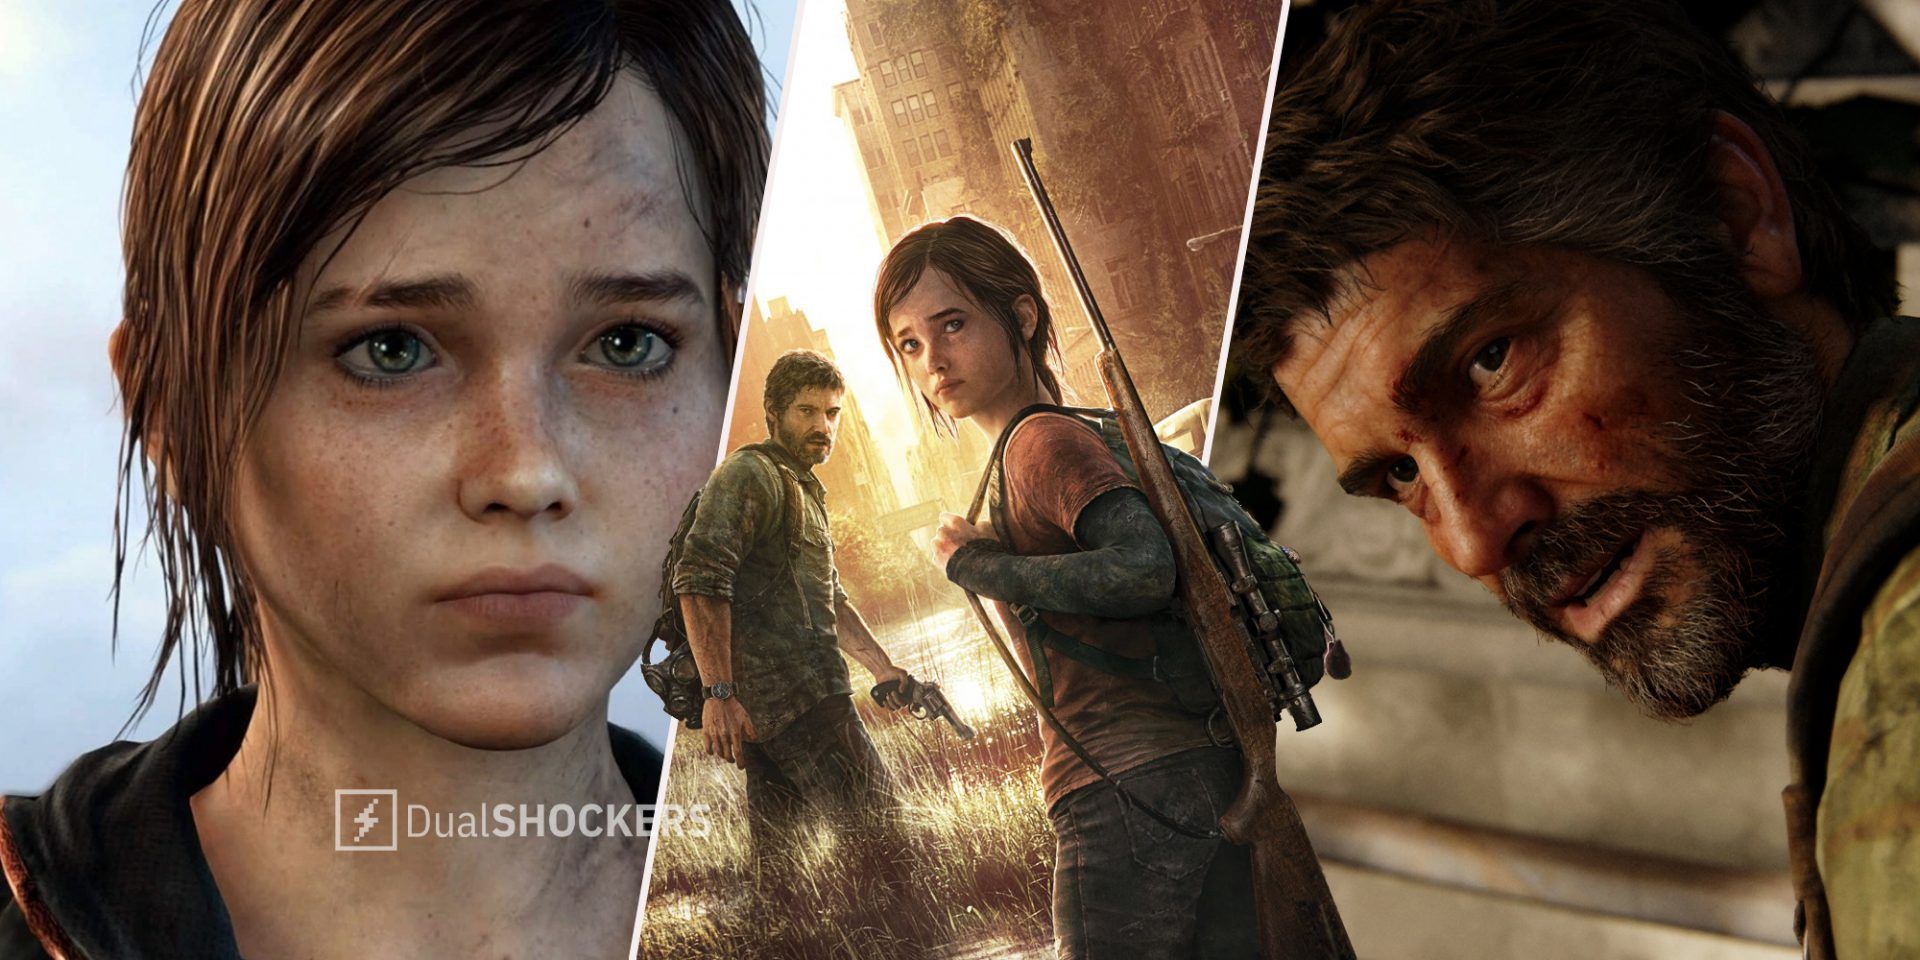 The Last of Us Part 1 Ellie on left, Ellie and Joel promo photo in middle, Joel on right